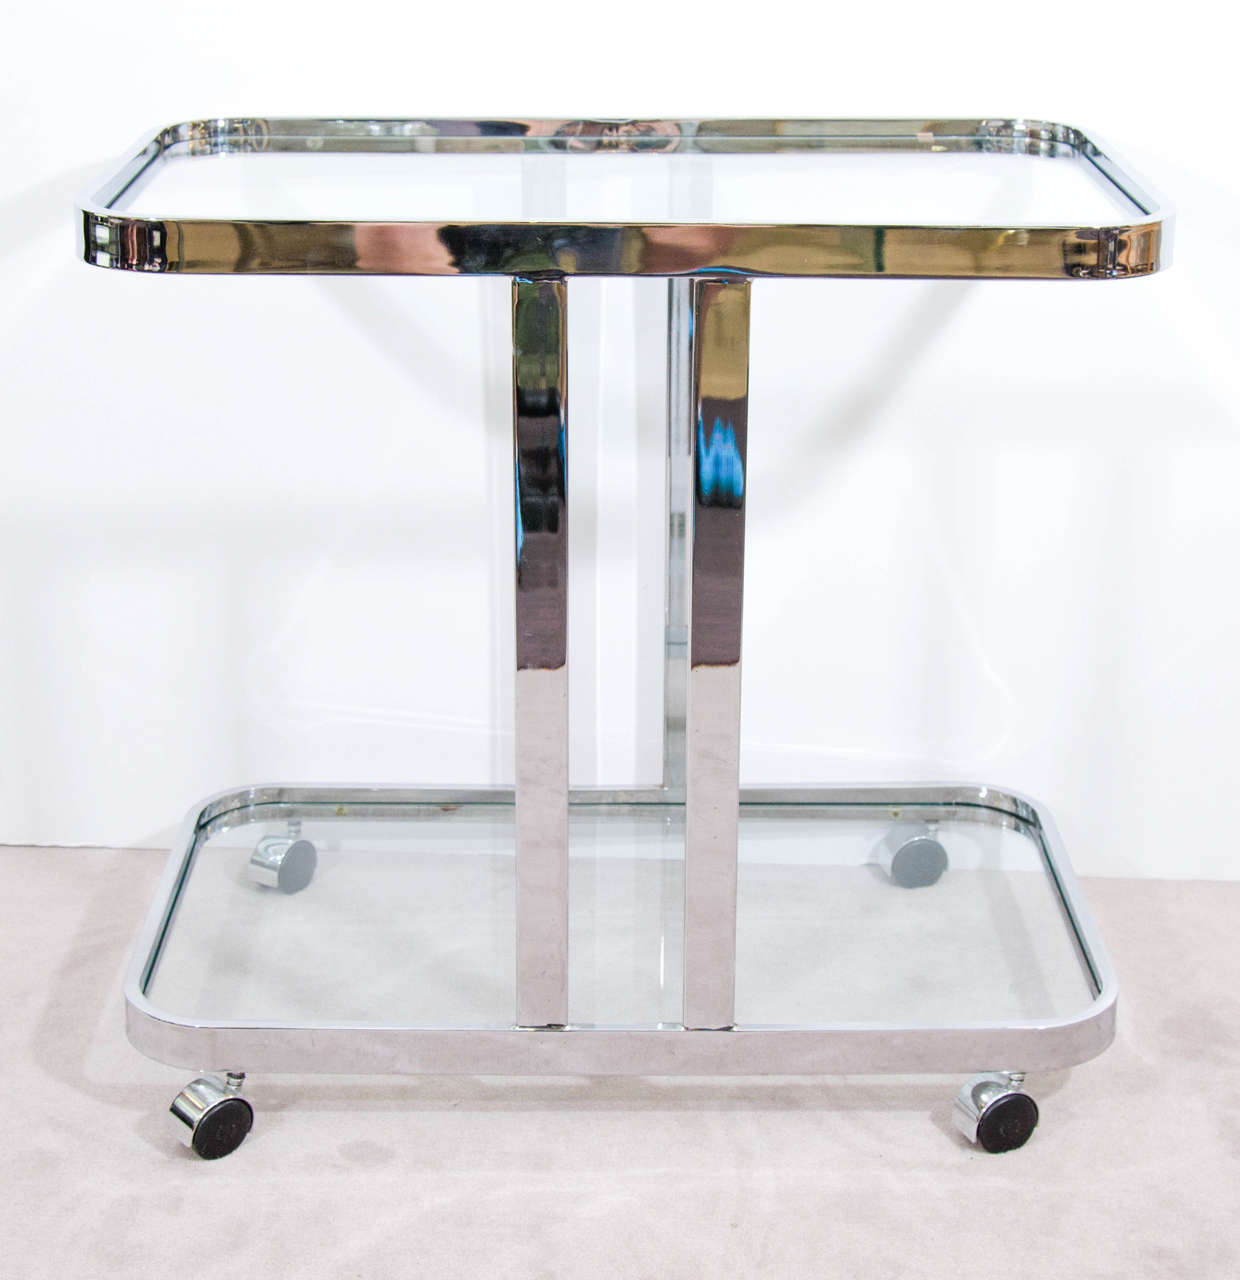 A vintage Milo Baughman flat bar chrome and glass bar cart on casters.

Good vintage condition with age appropriate wear. Some minor scratches.